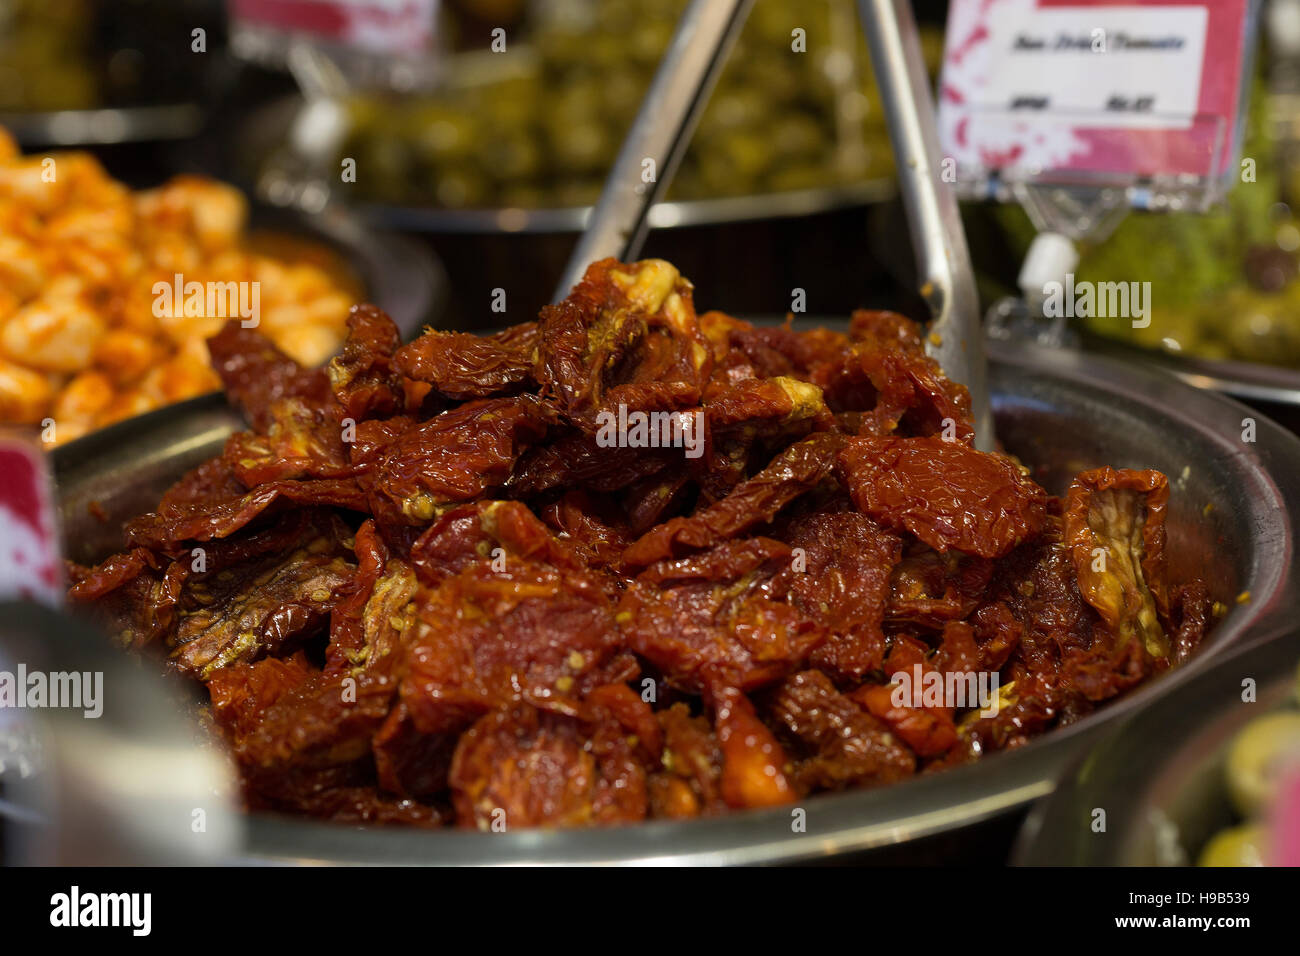 Christmas farmers market all you can eat buffet deli smorgasbord of dishes including sundried tomatoes Stock Photo